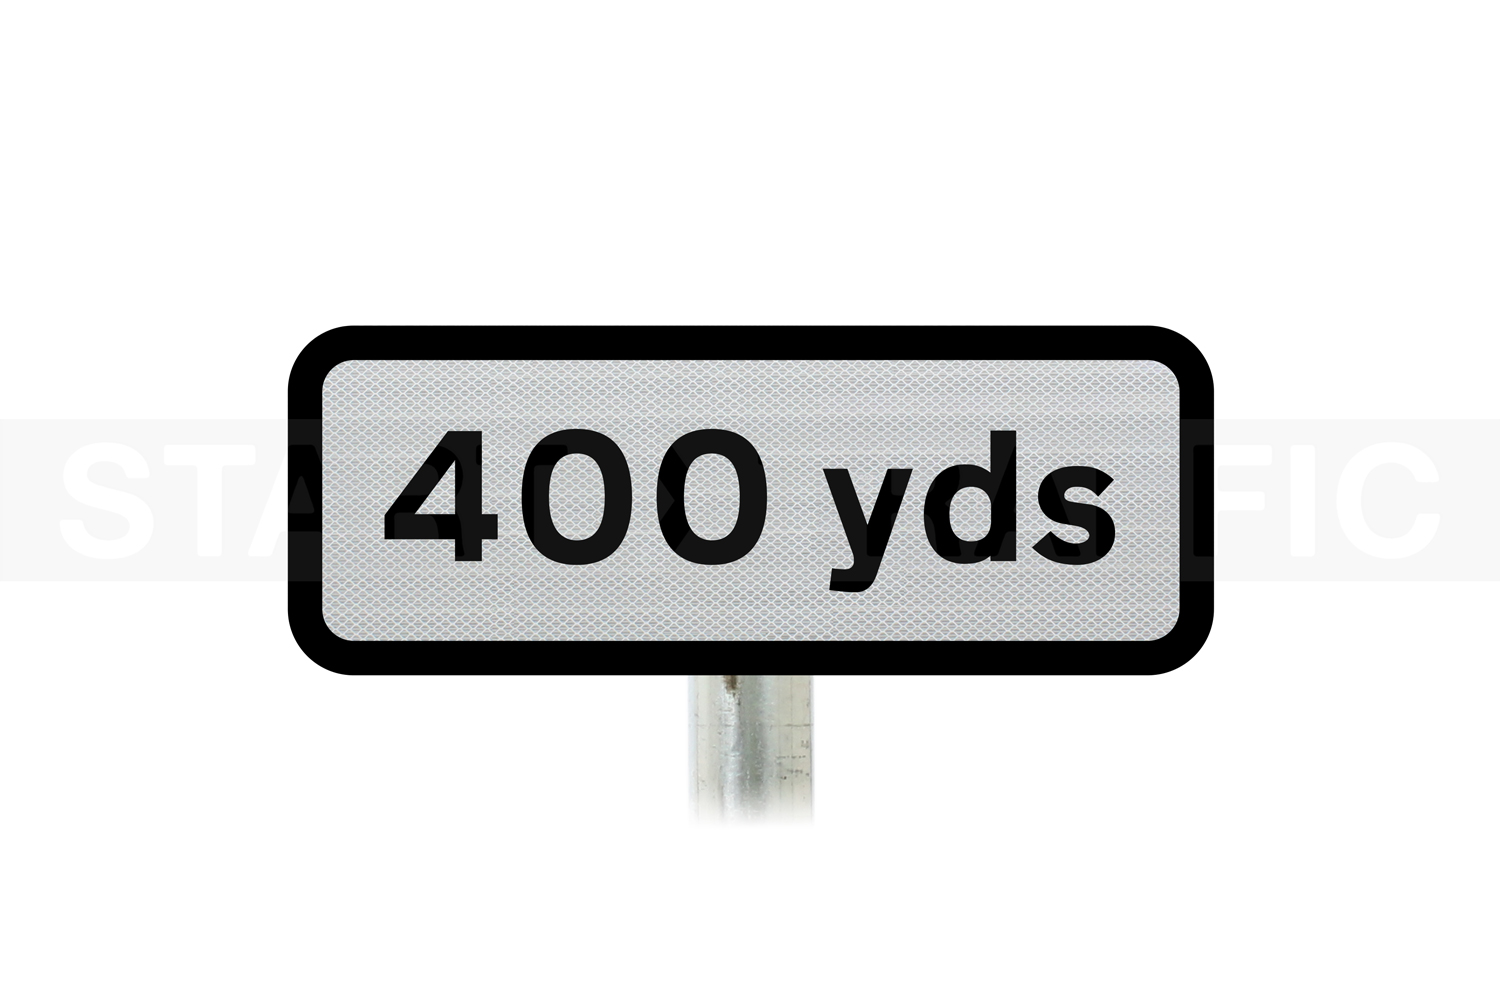 400 yards distance plate